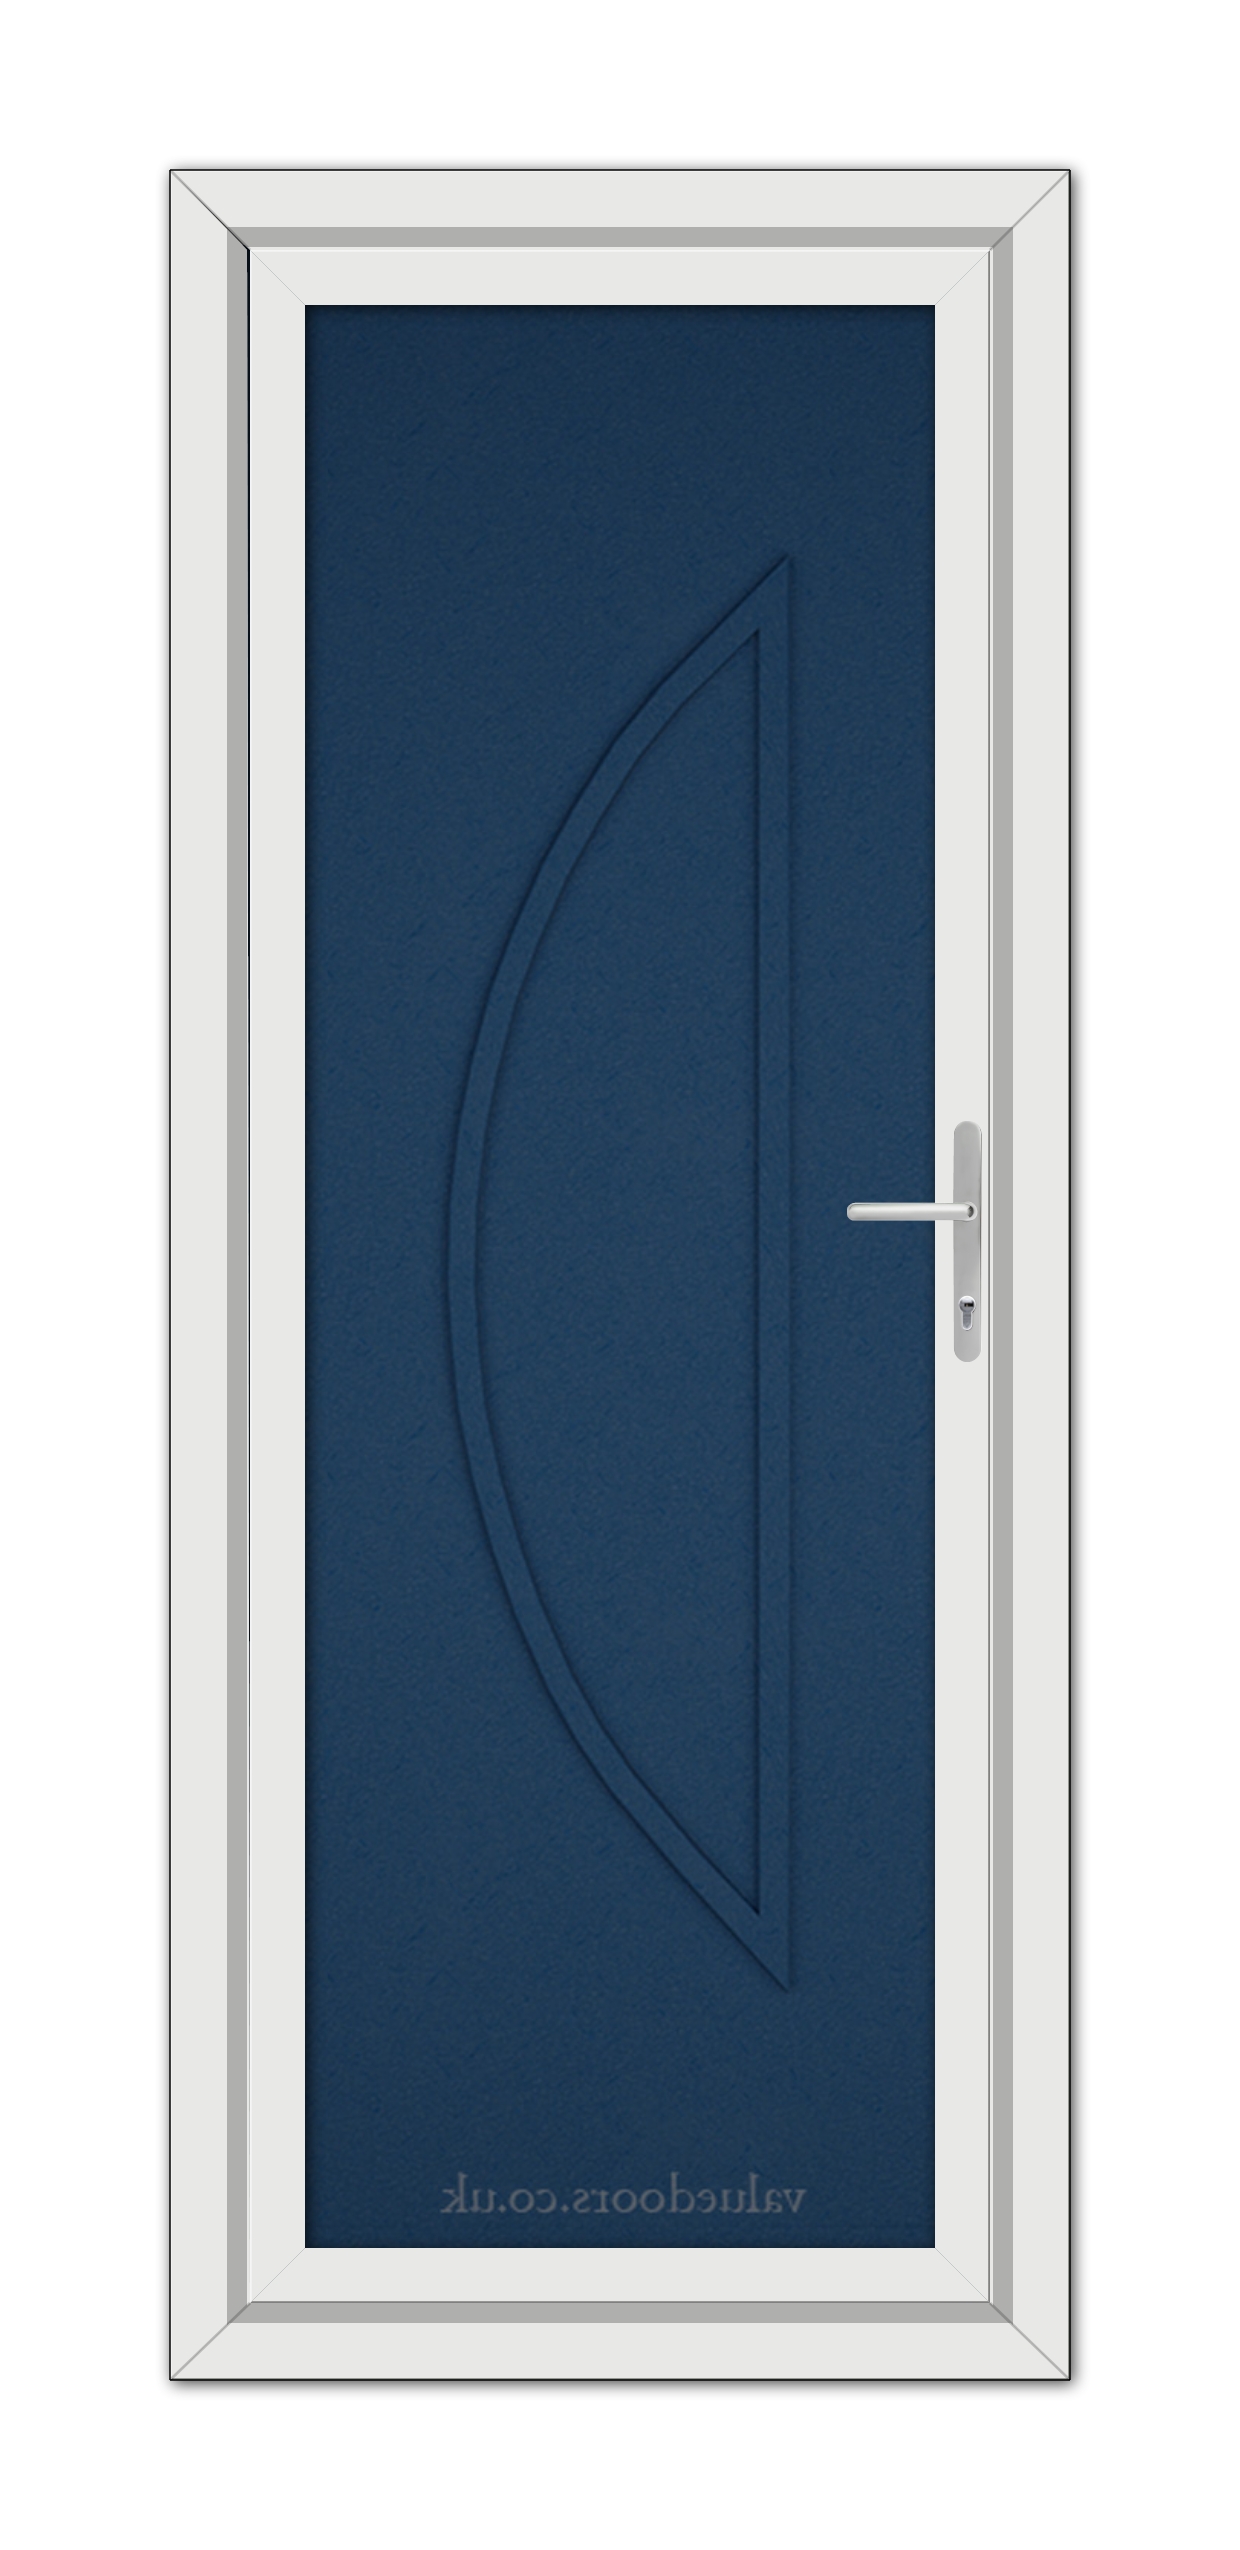 Vertical view of a closed Blue Modern 5051 Solid uPVC door with a sleek handle, featuring a blue center panel with an elegant curved design, encased in a white frame.